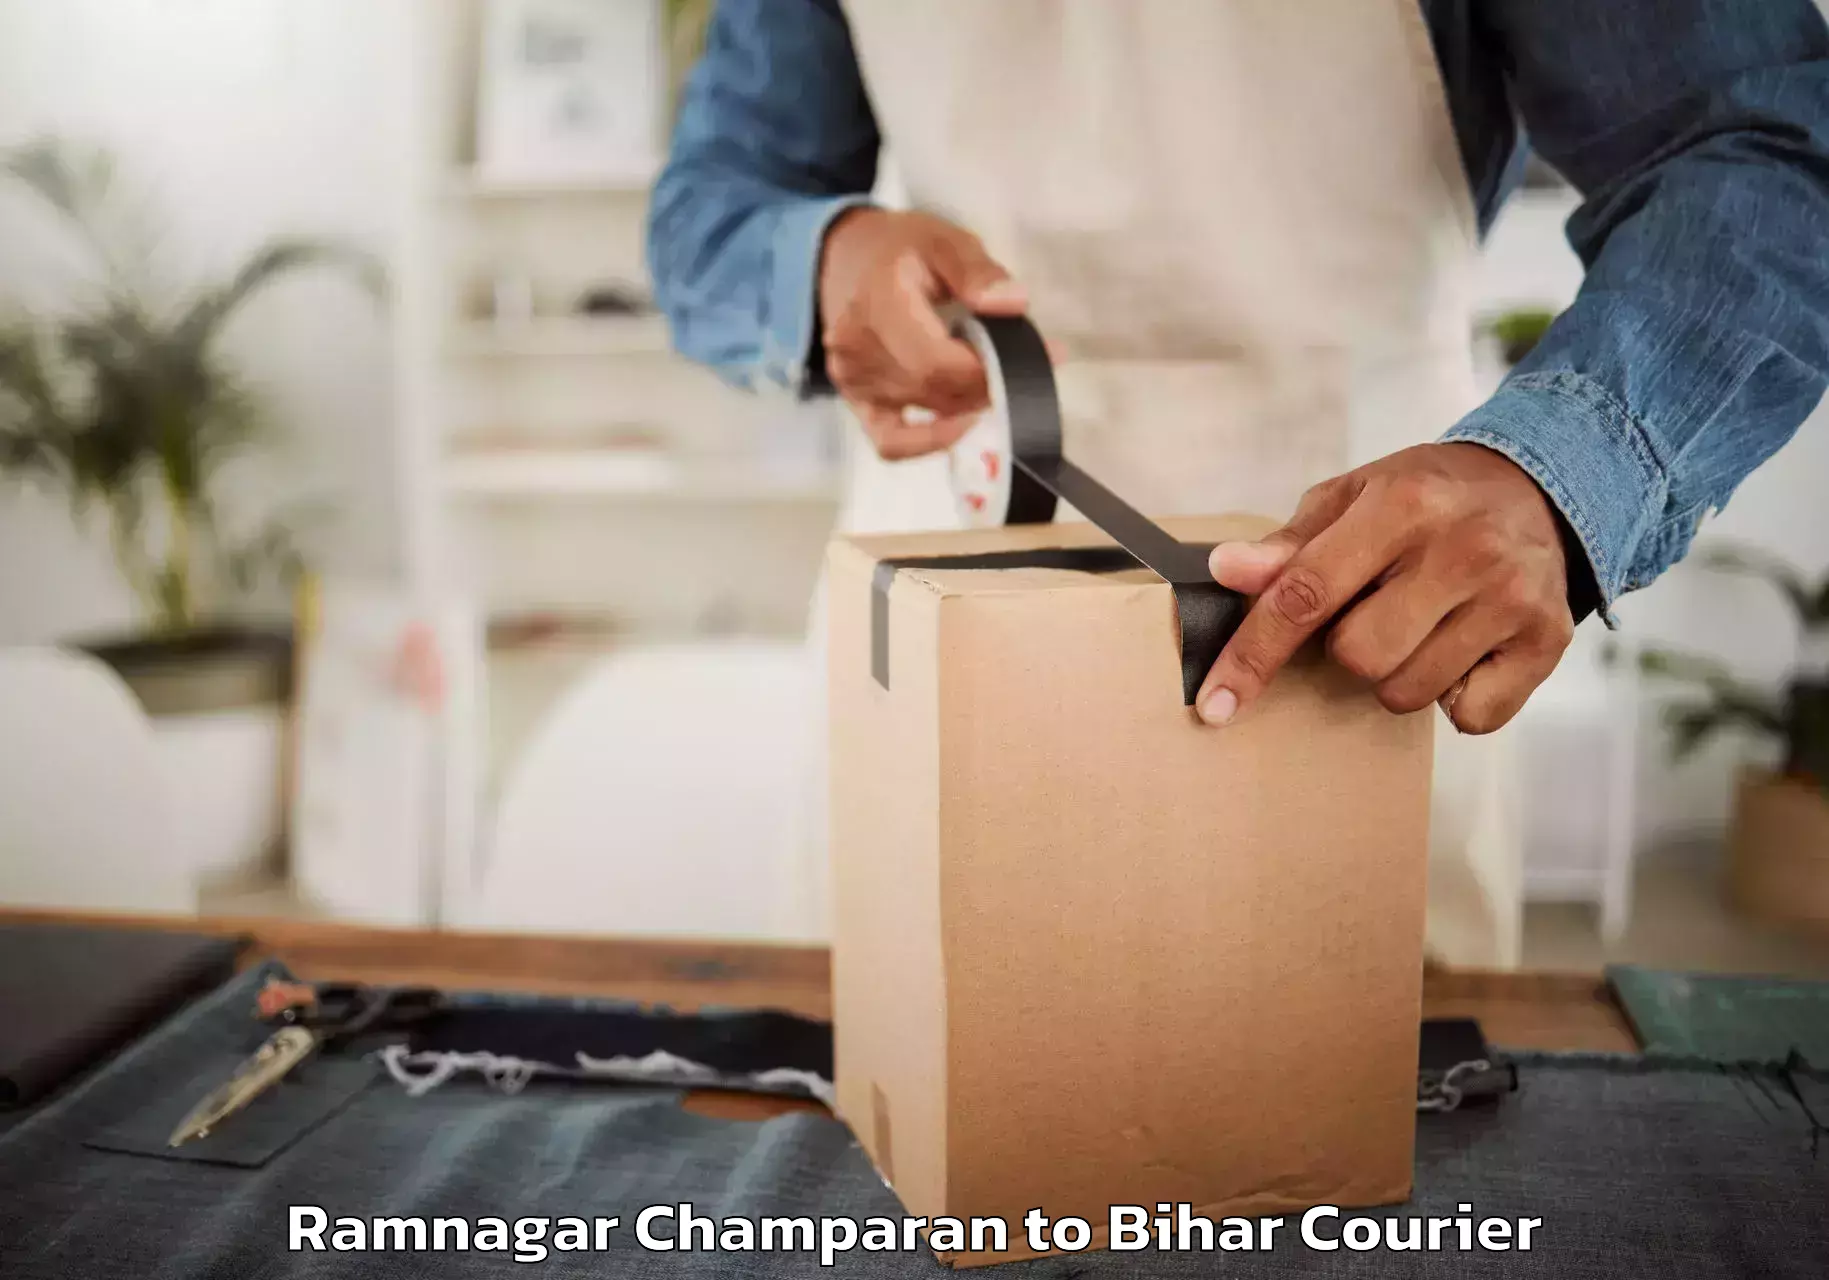 Trusted relocation experts Ramnagar Champaran to Mohammadpur